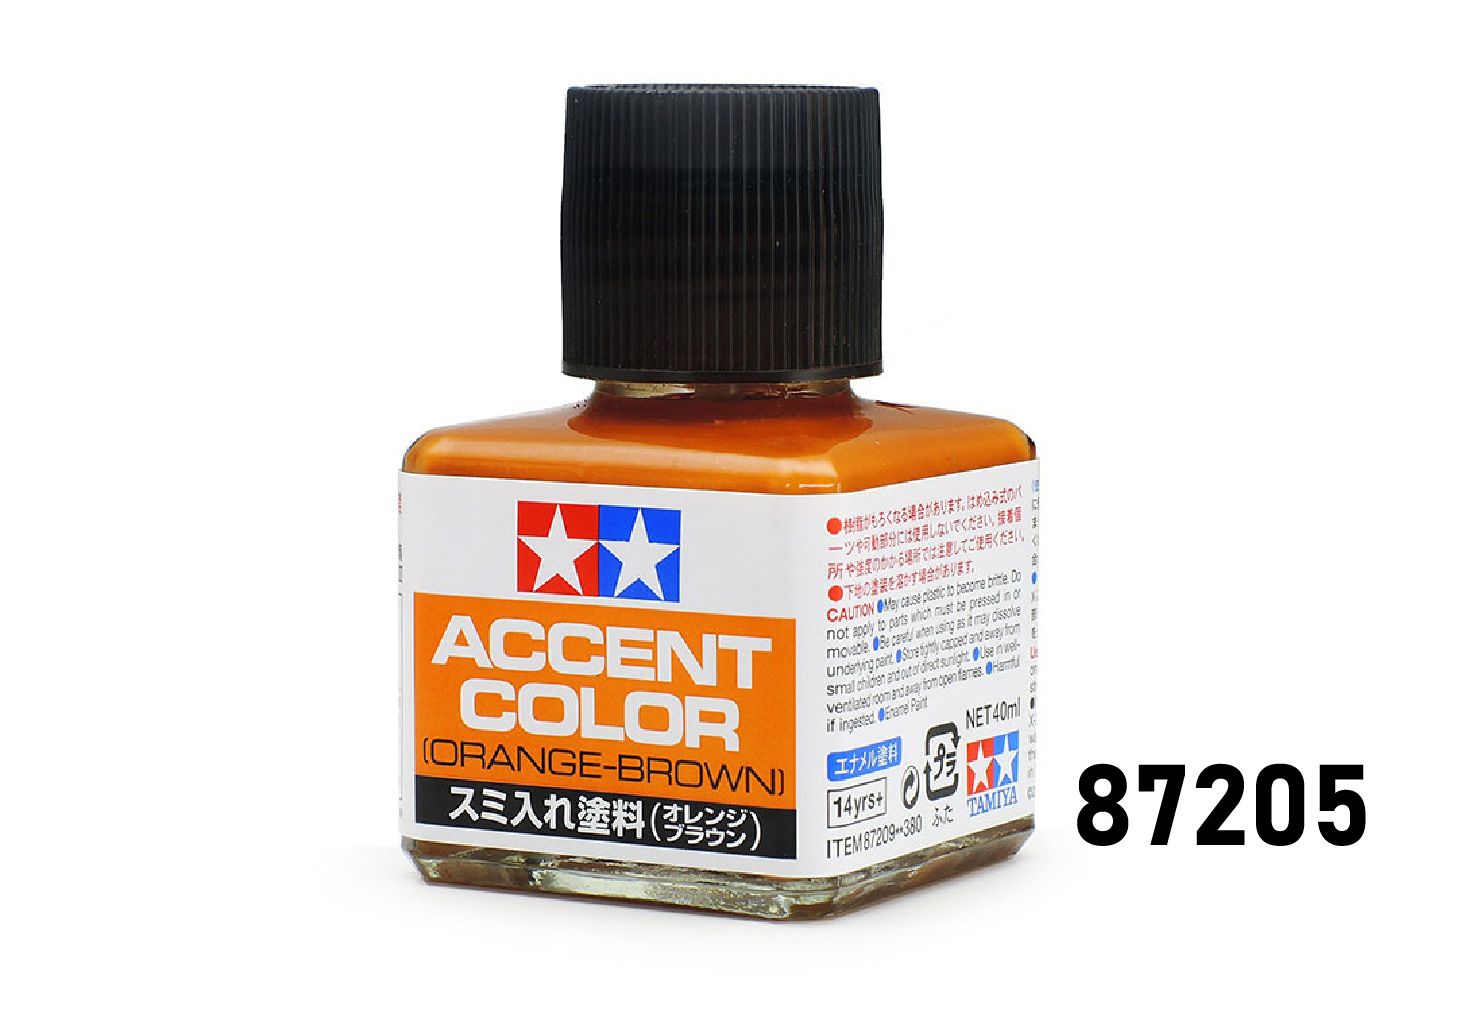  Dung dịch tạo accent color orange-brown effect Tamiya 87209 